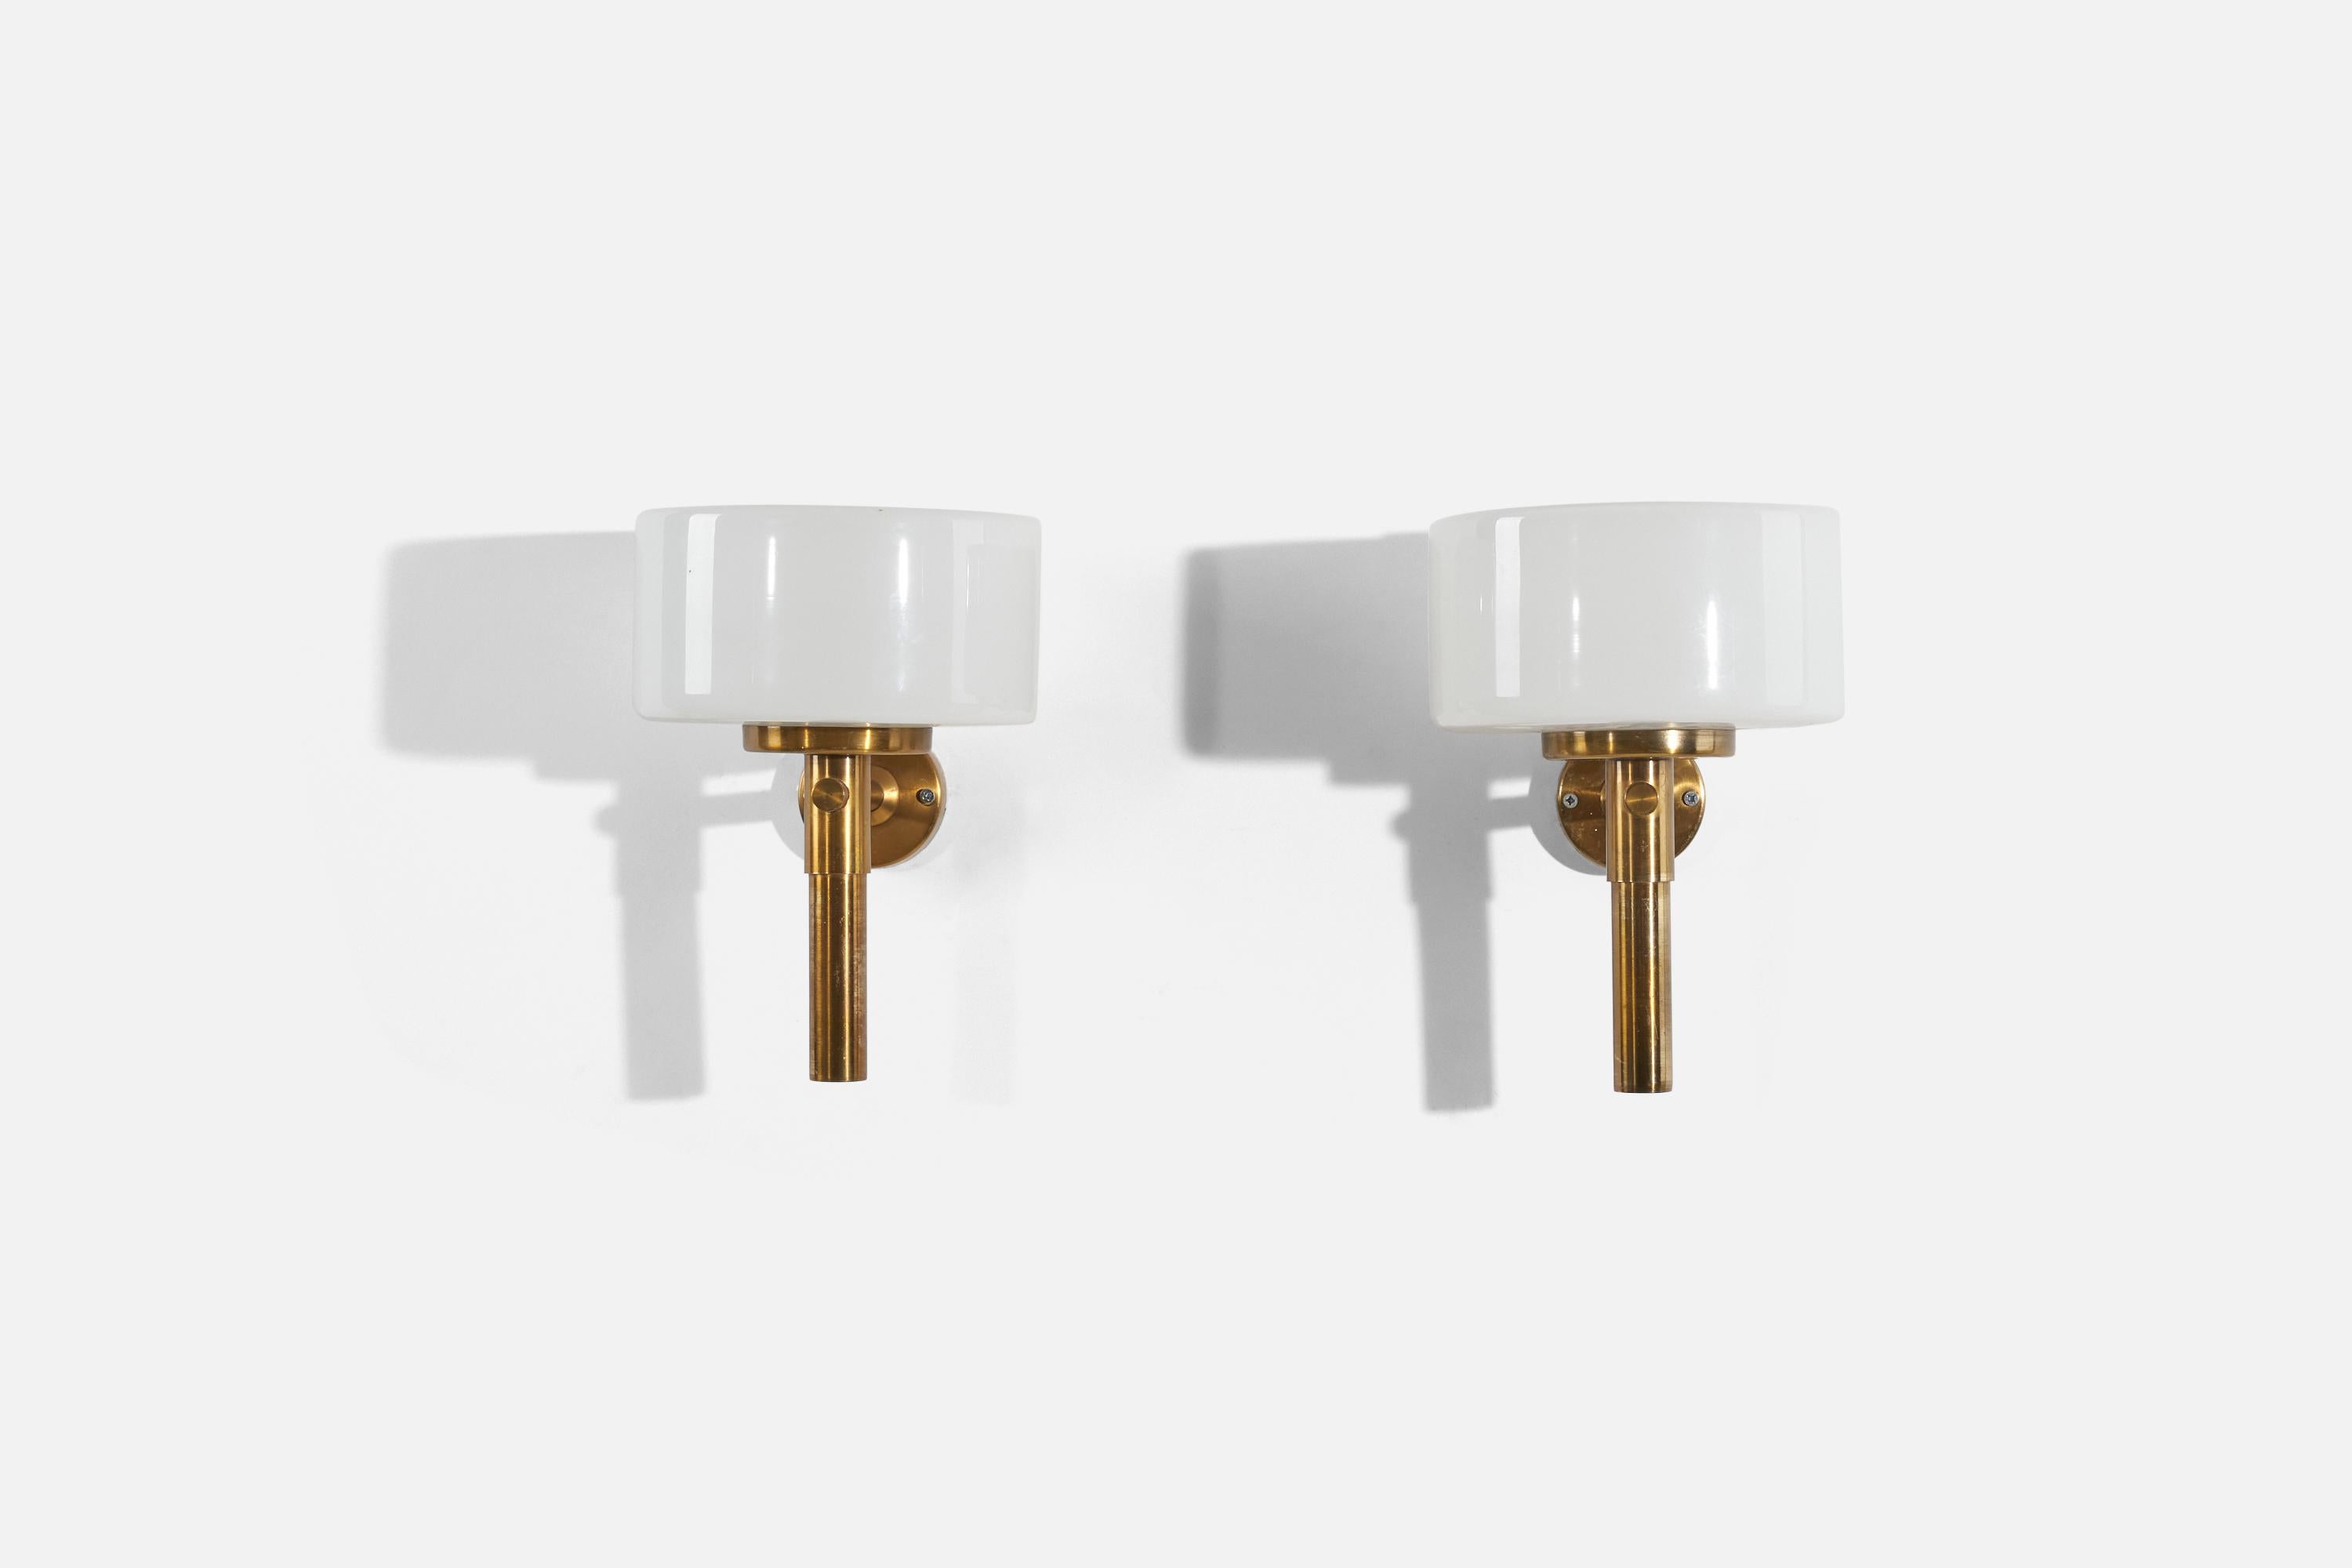 A pair of brass and milk glass wall lights designed and produced by ASEA, Sweden, 1950s.

Dimensions of the back plate (inches) : 2.9375 x 2.9375 x .75 (H x W x D)
Does not come with screws.